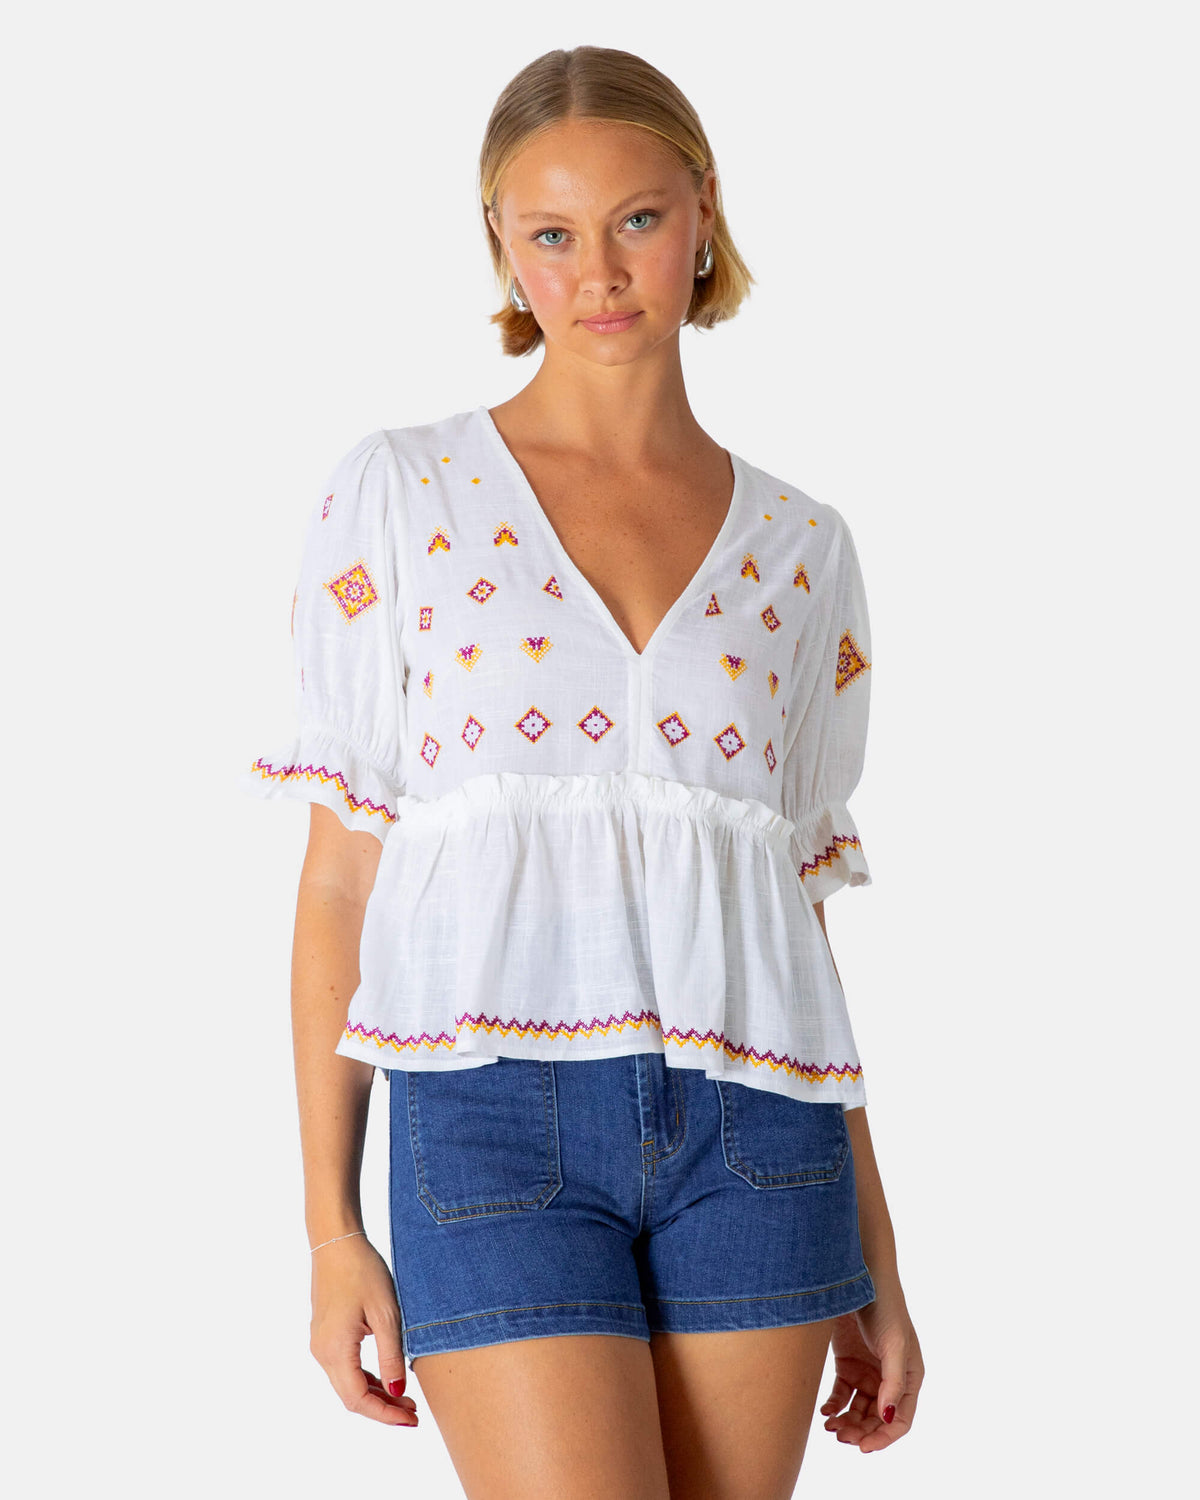 WHITE V NECK EMBROIDERY BABYDOLL TOP